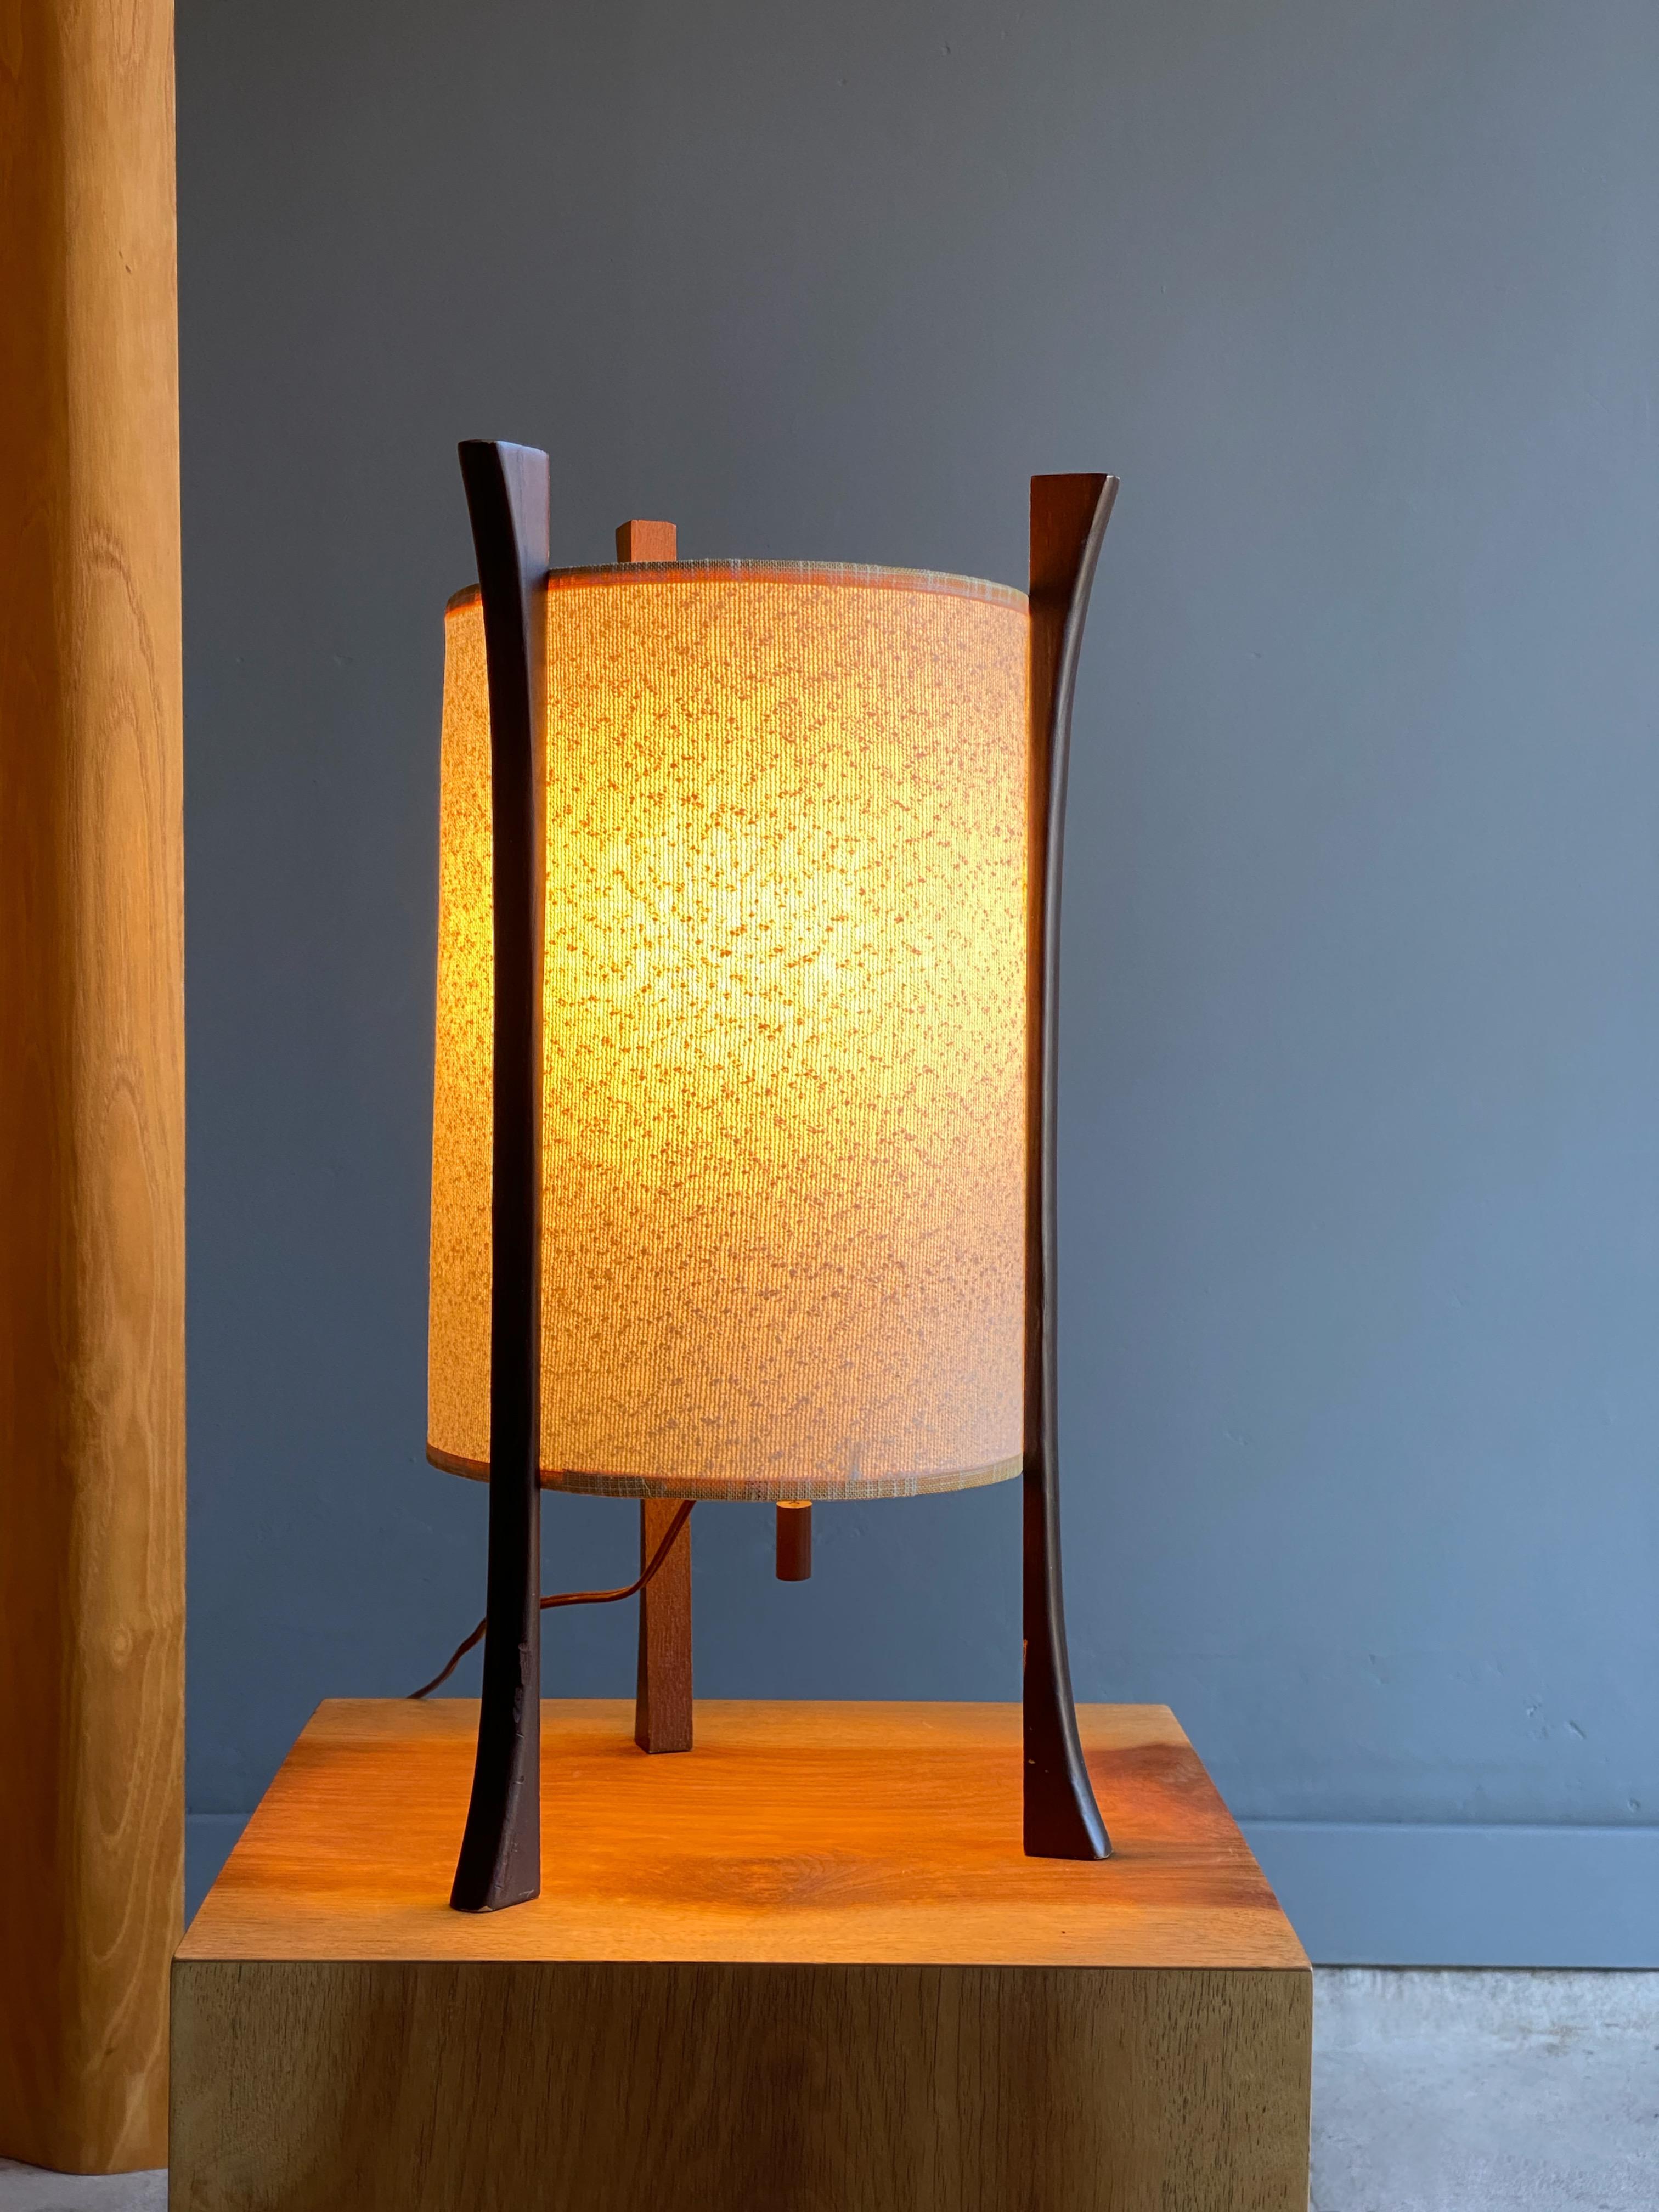 Lovely and unique mid century table lamp. Sculptural form mixed with soft ambient light makes this a perfect mesh with a mid century or Asian influenced interior. Attractive hanging wood pull tab for easy on/off switch.